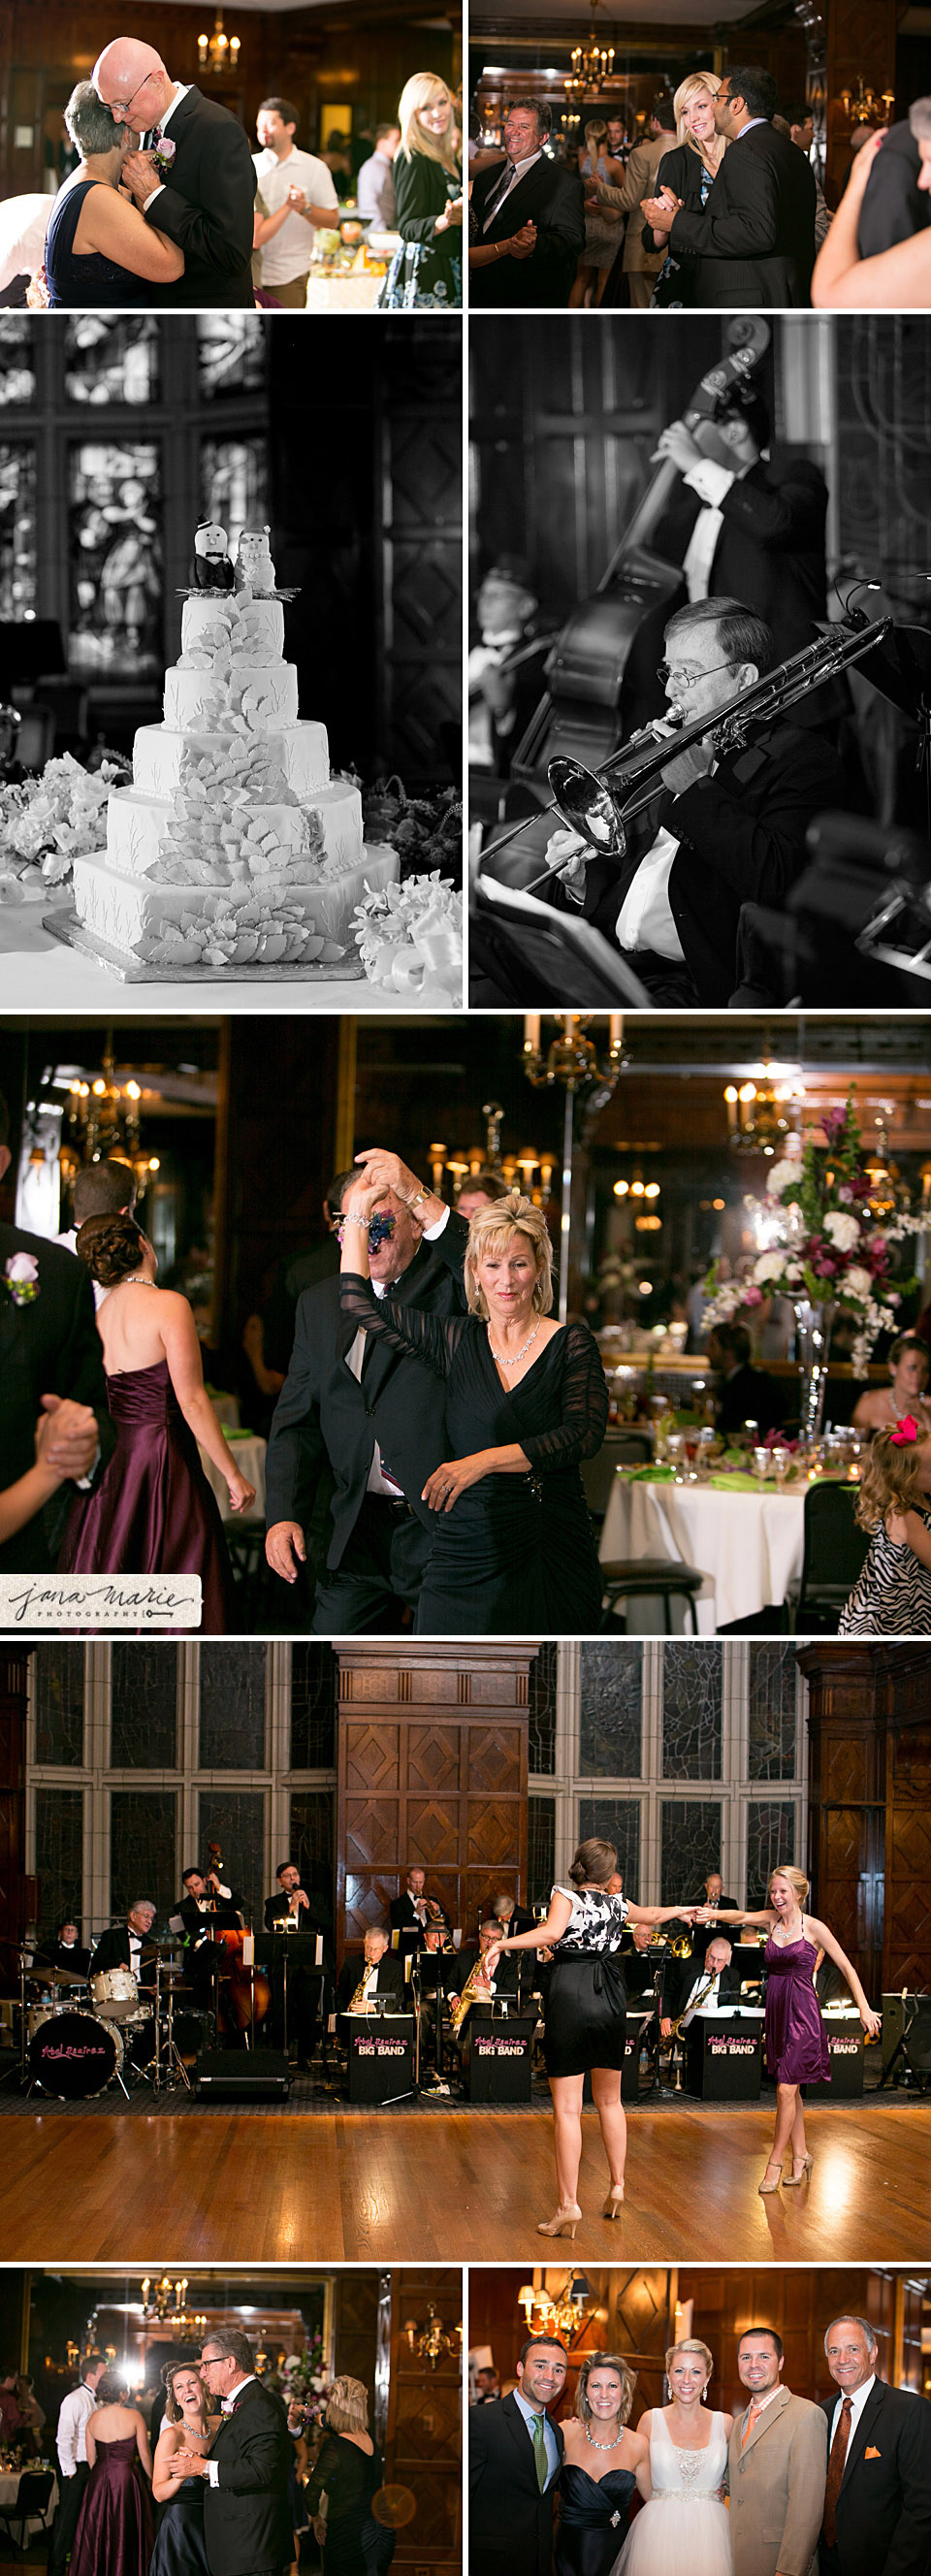 Friends and family, unity, marriage, The Baltimore Club, Kansas City wedding professionals